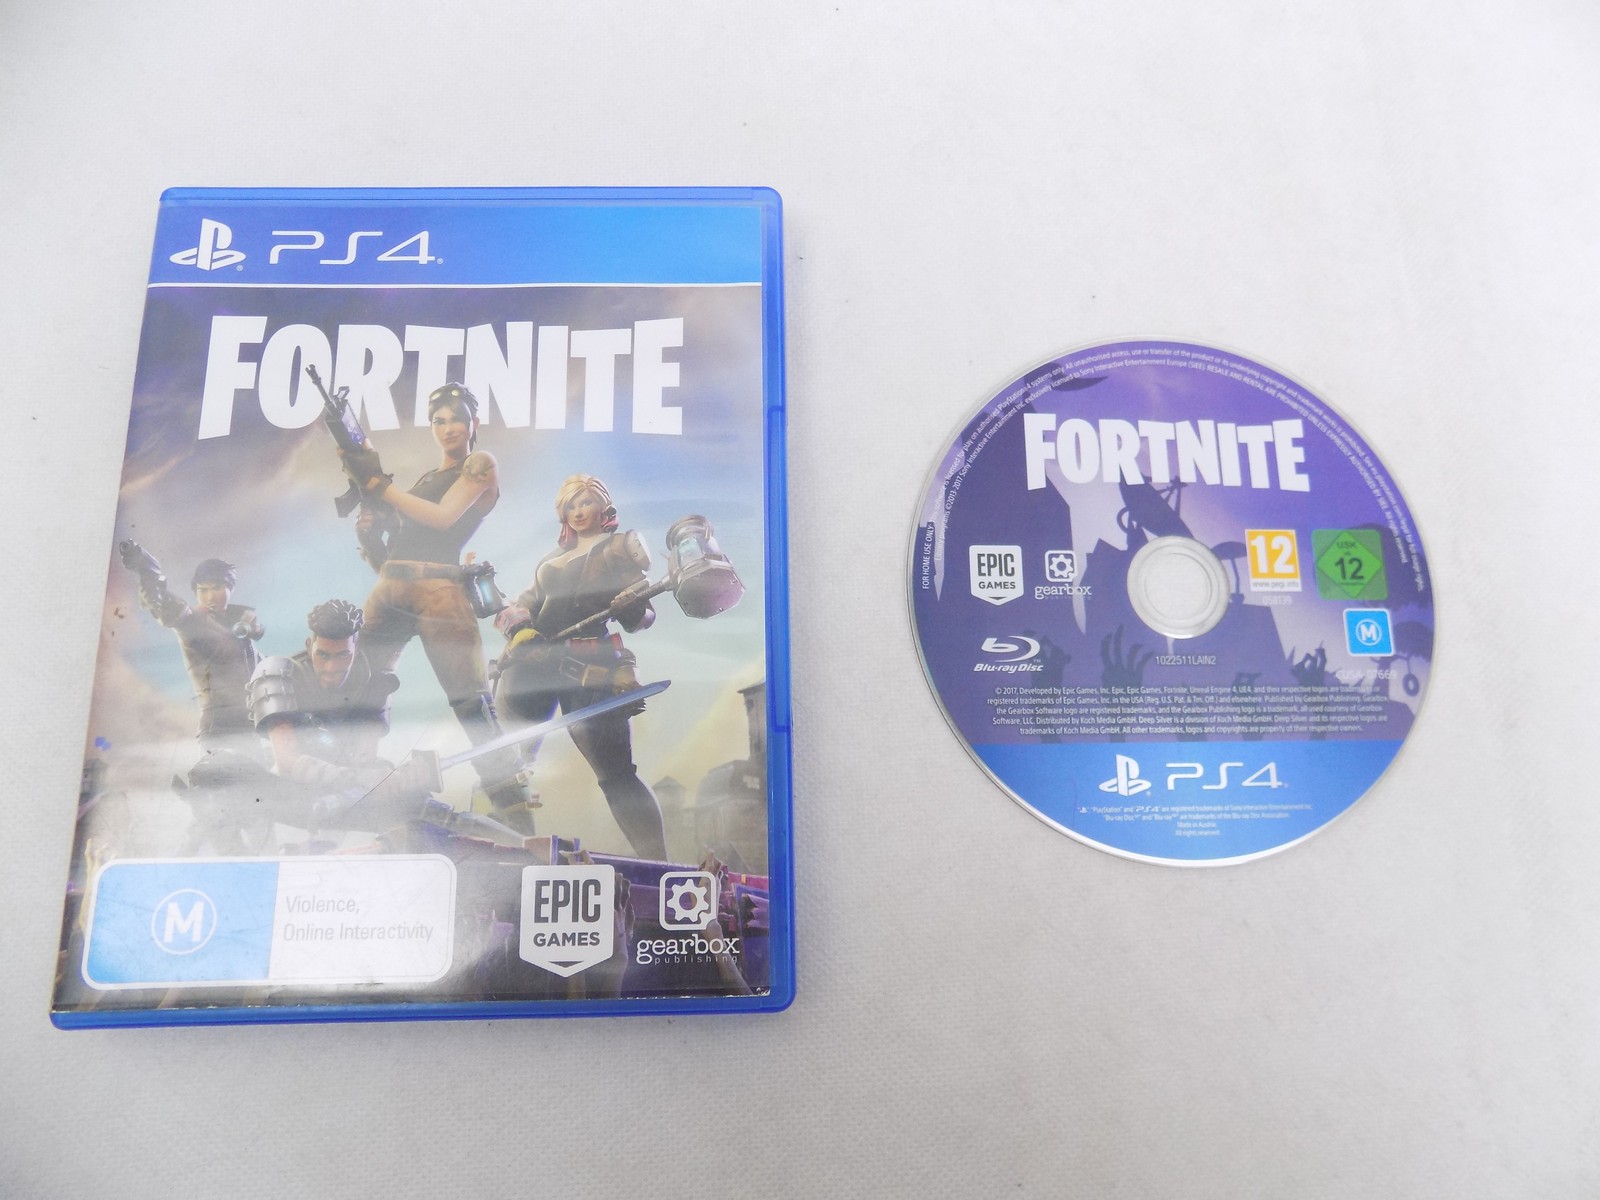 Mint Disc Playstation 4 Ps4 Fortnite - Free Starboard Games